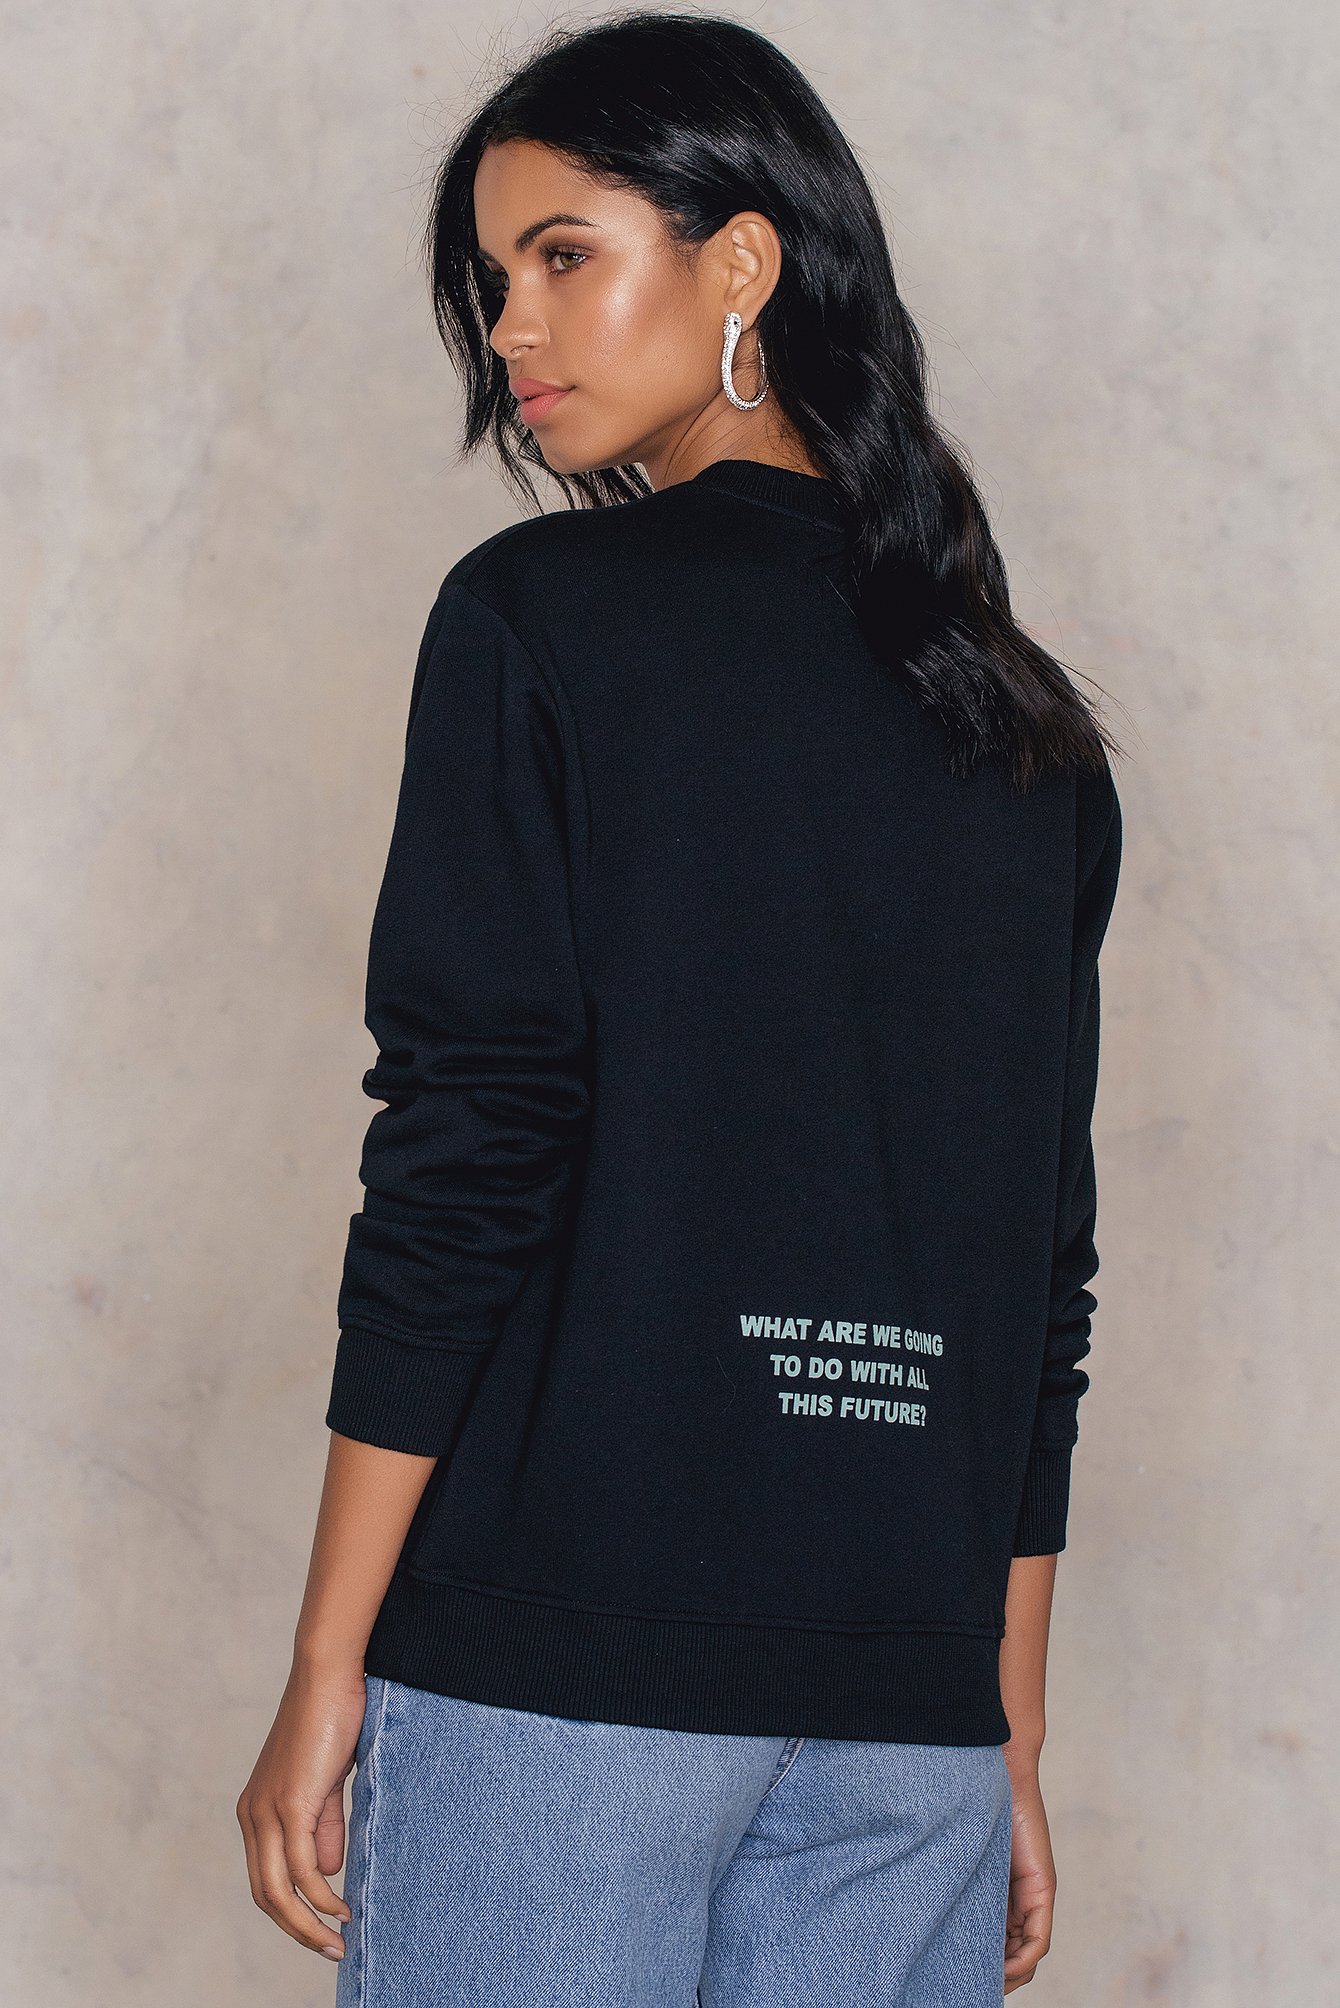 All This Future Sweater Black | NA-KD